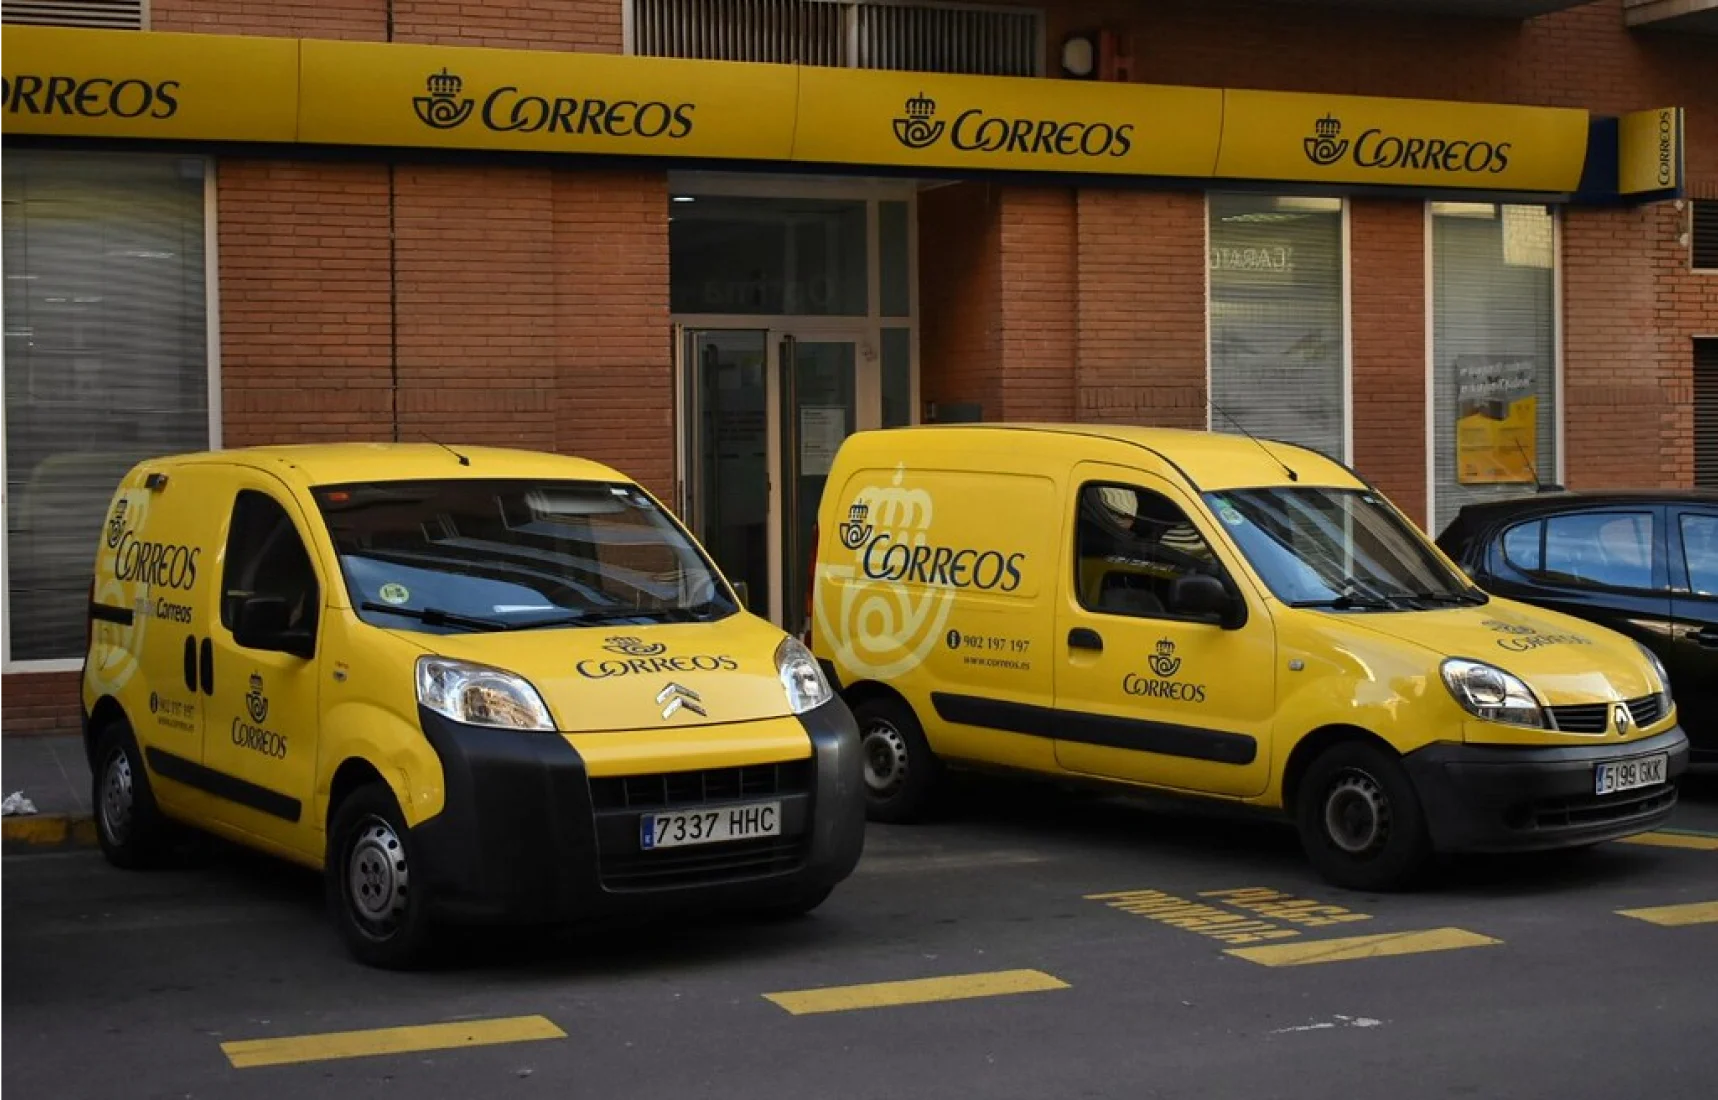 Correos courier vans parked in depot